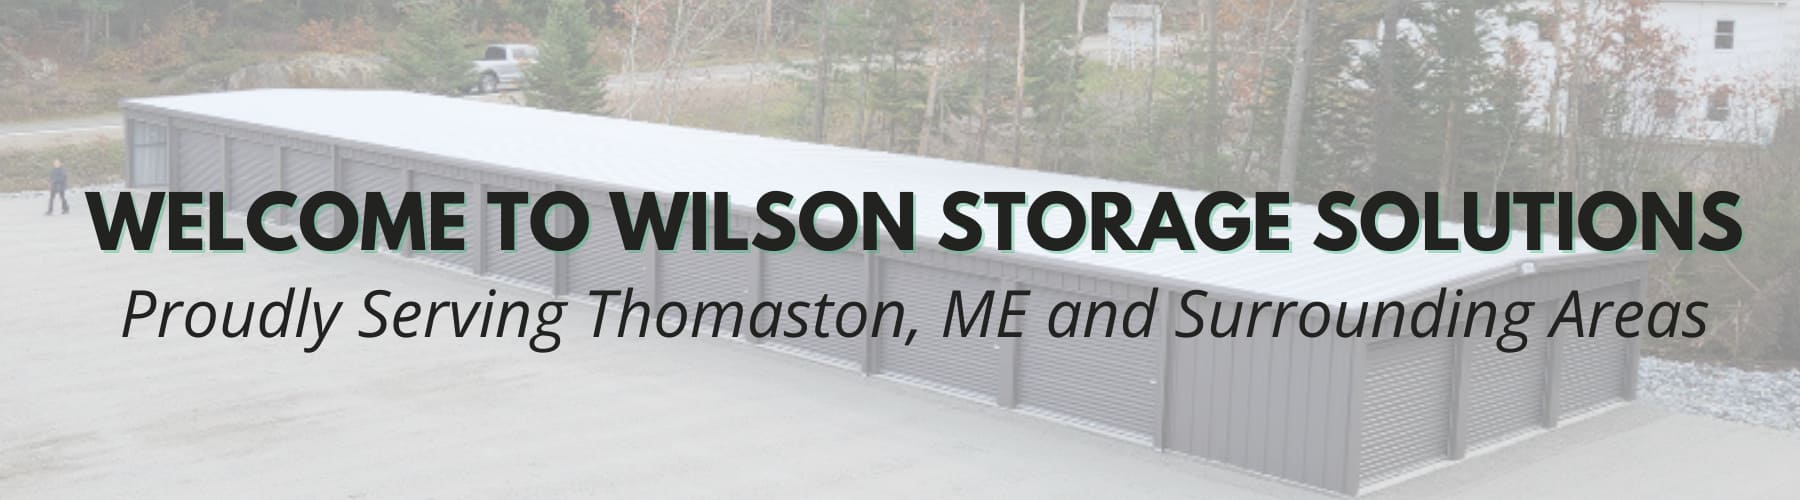 Image of the Wilson Storage Facility. Text reads Welcome to Wilson Storage Solutions, proudly serving Thomaston, ME and surrounding areas